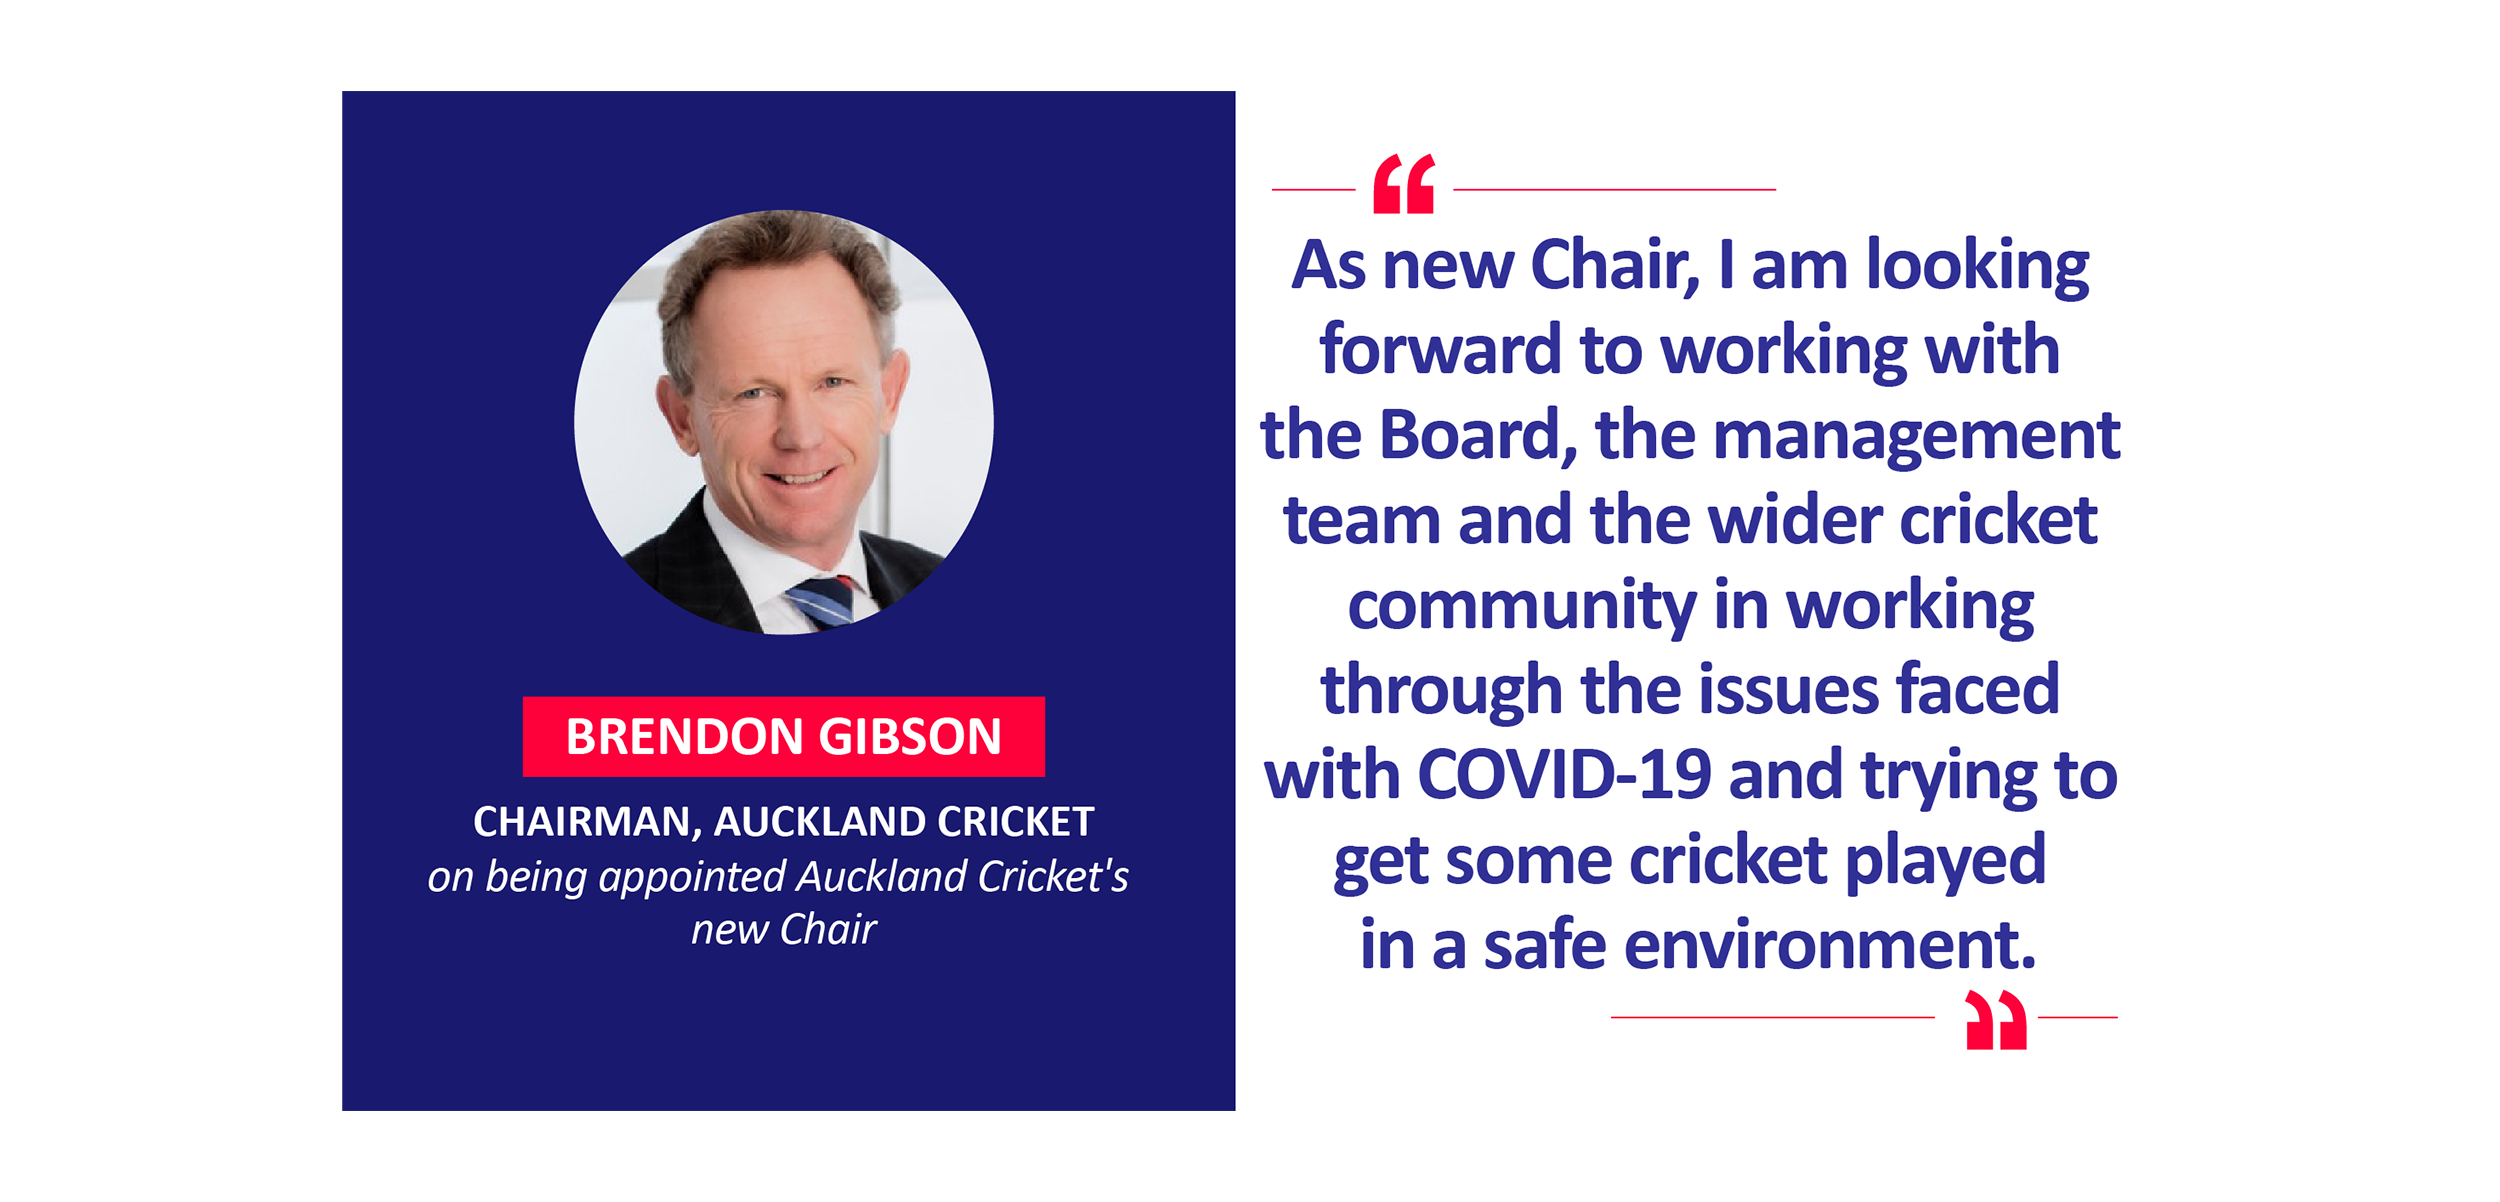 Brendon Gibson, Chairman, Auckland Cricket on being appointed Auckland Cricket's new Chair